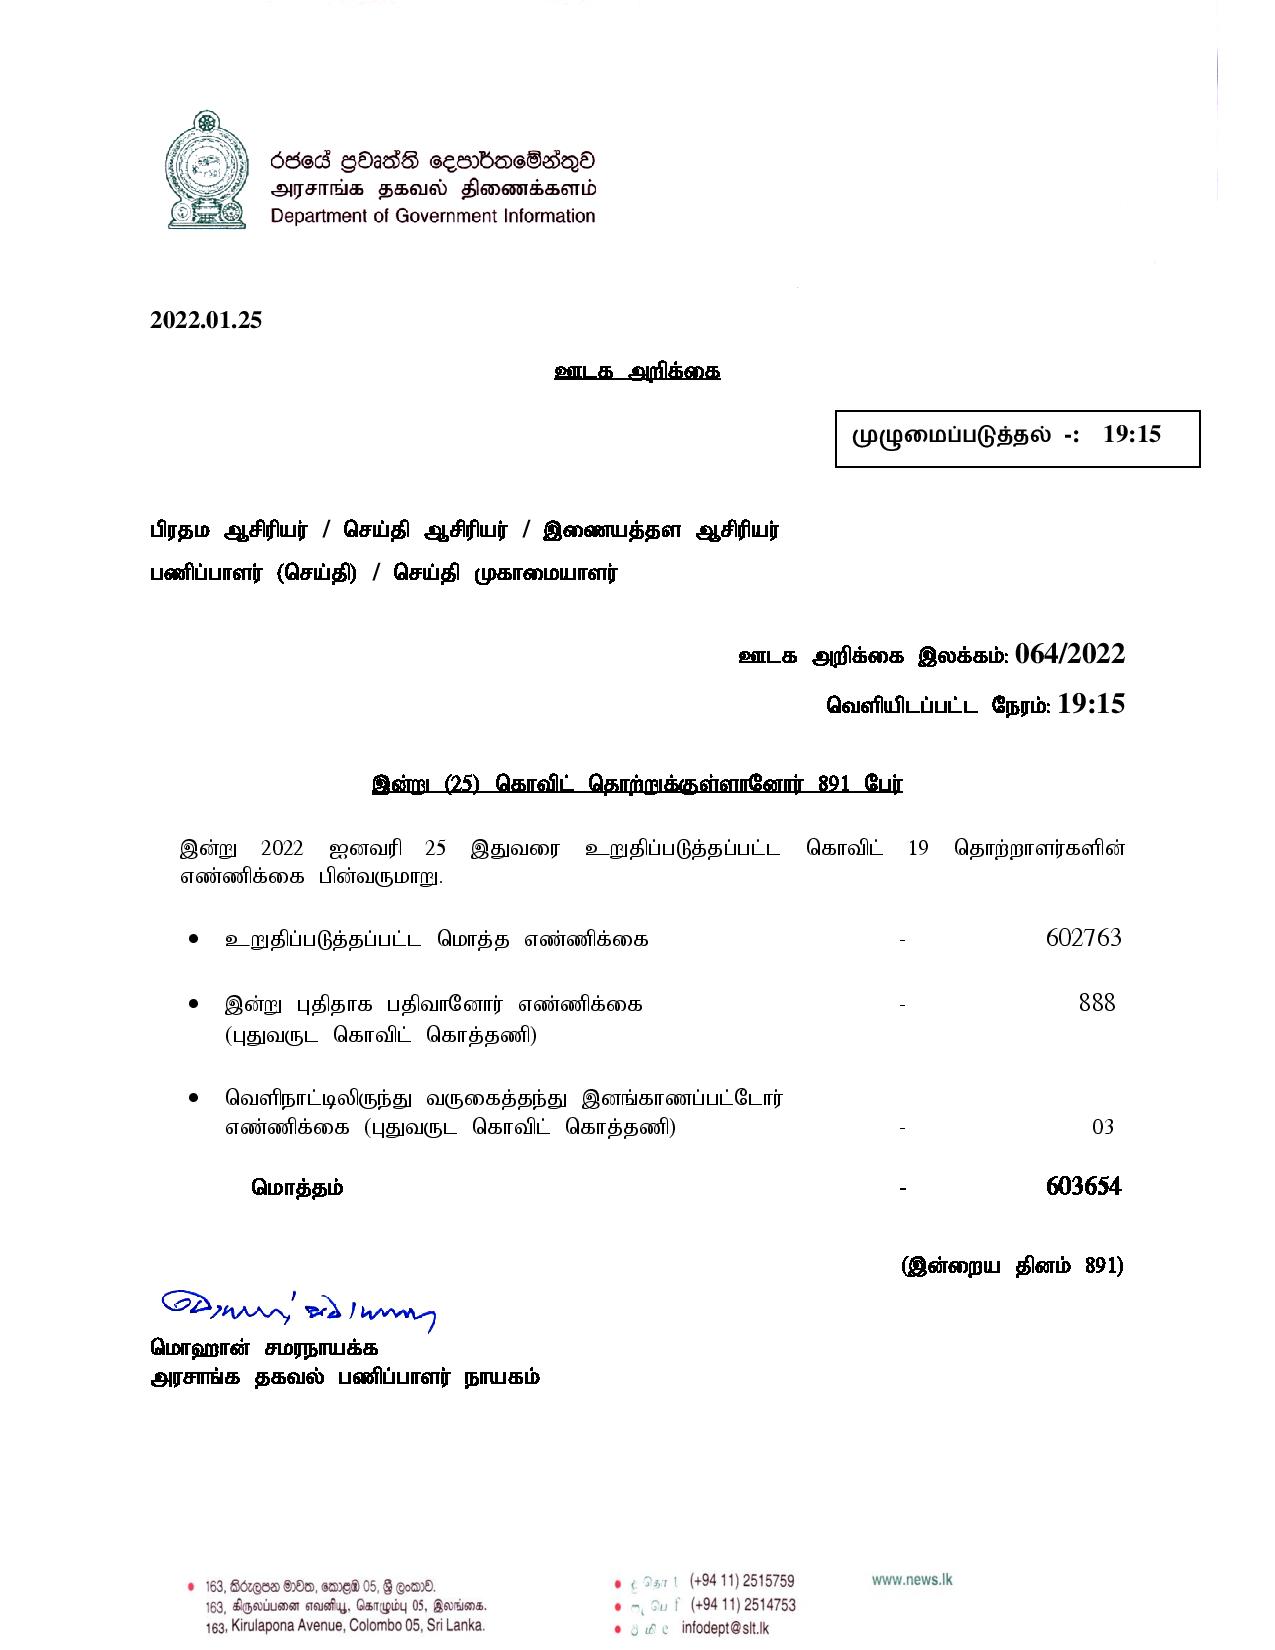 Press Release 64 Tamil page 001